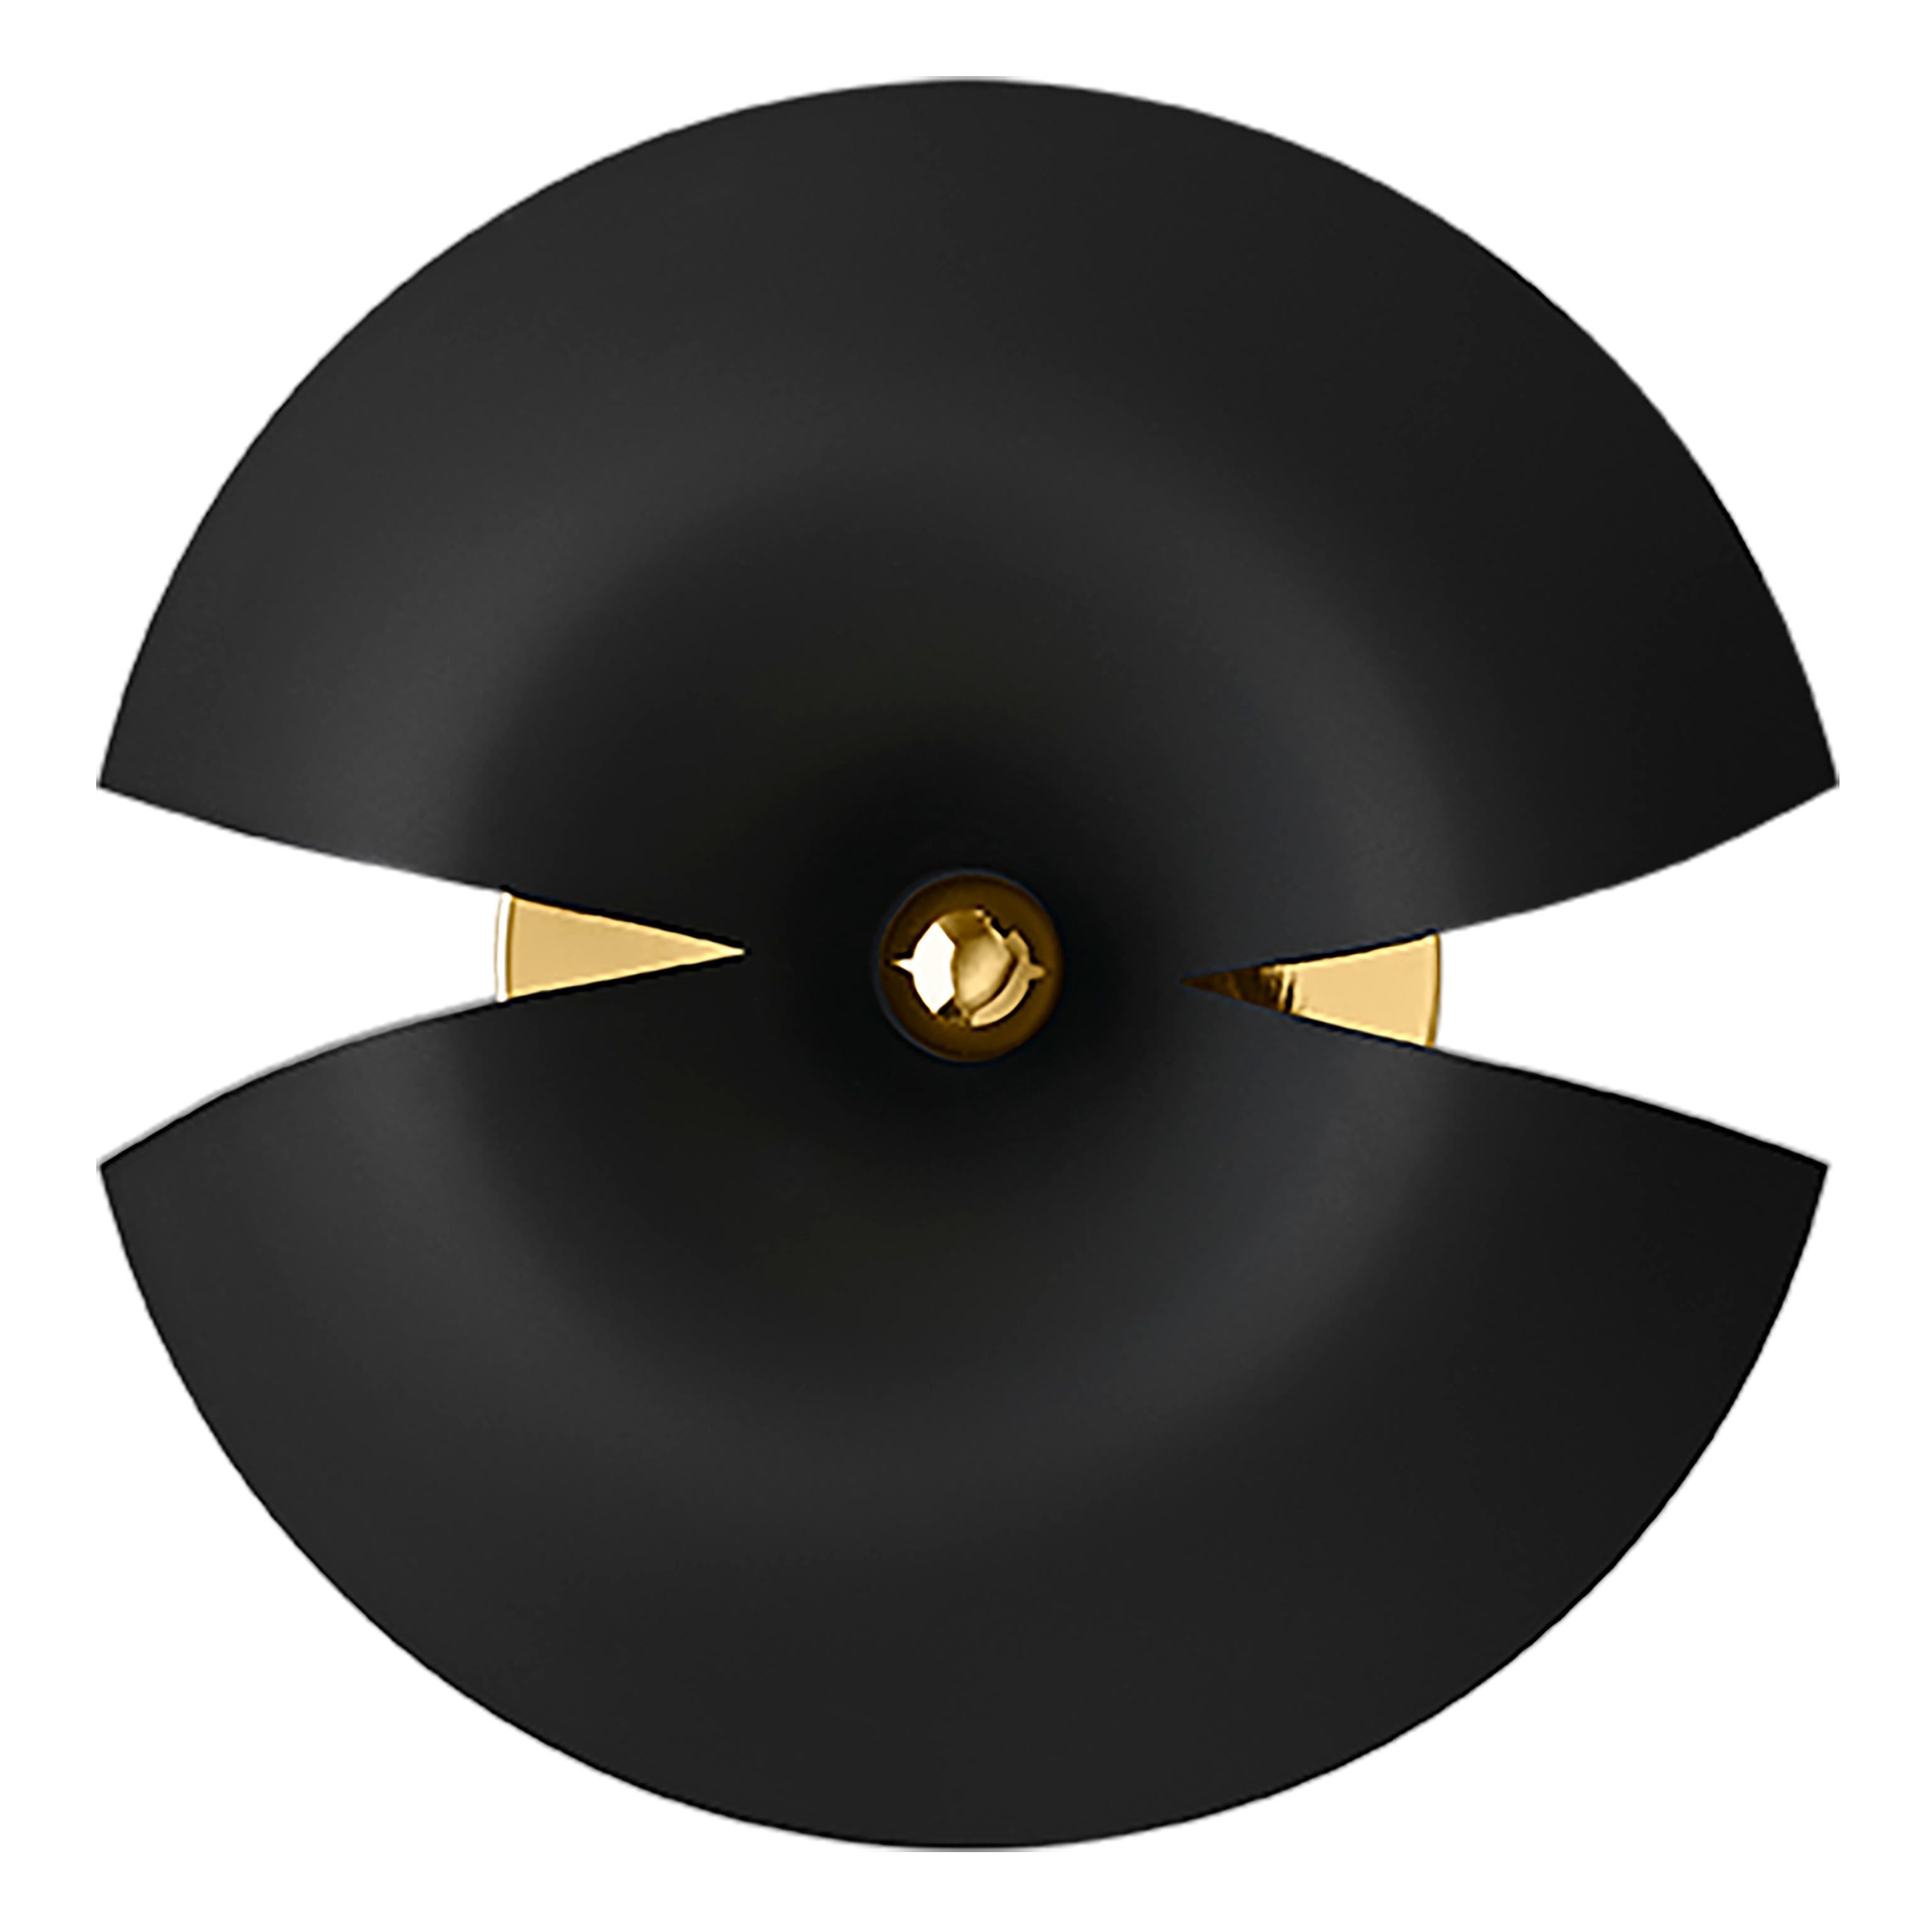 Large Black and Gold Contemporary wall lamp 
Dimensions: Diameter 45 x H 18 cm 
Materials: Aluminum with Powder-Coated. Brass plated details, Porcelain socket, Plastic switch, and Black textile cord. 
Details: For all lamps the light source is E27